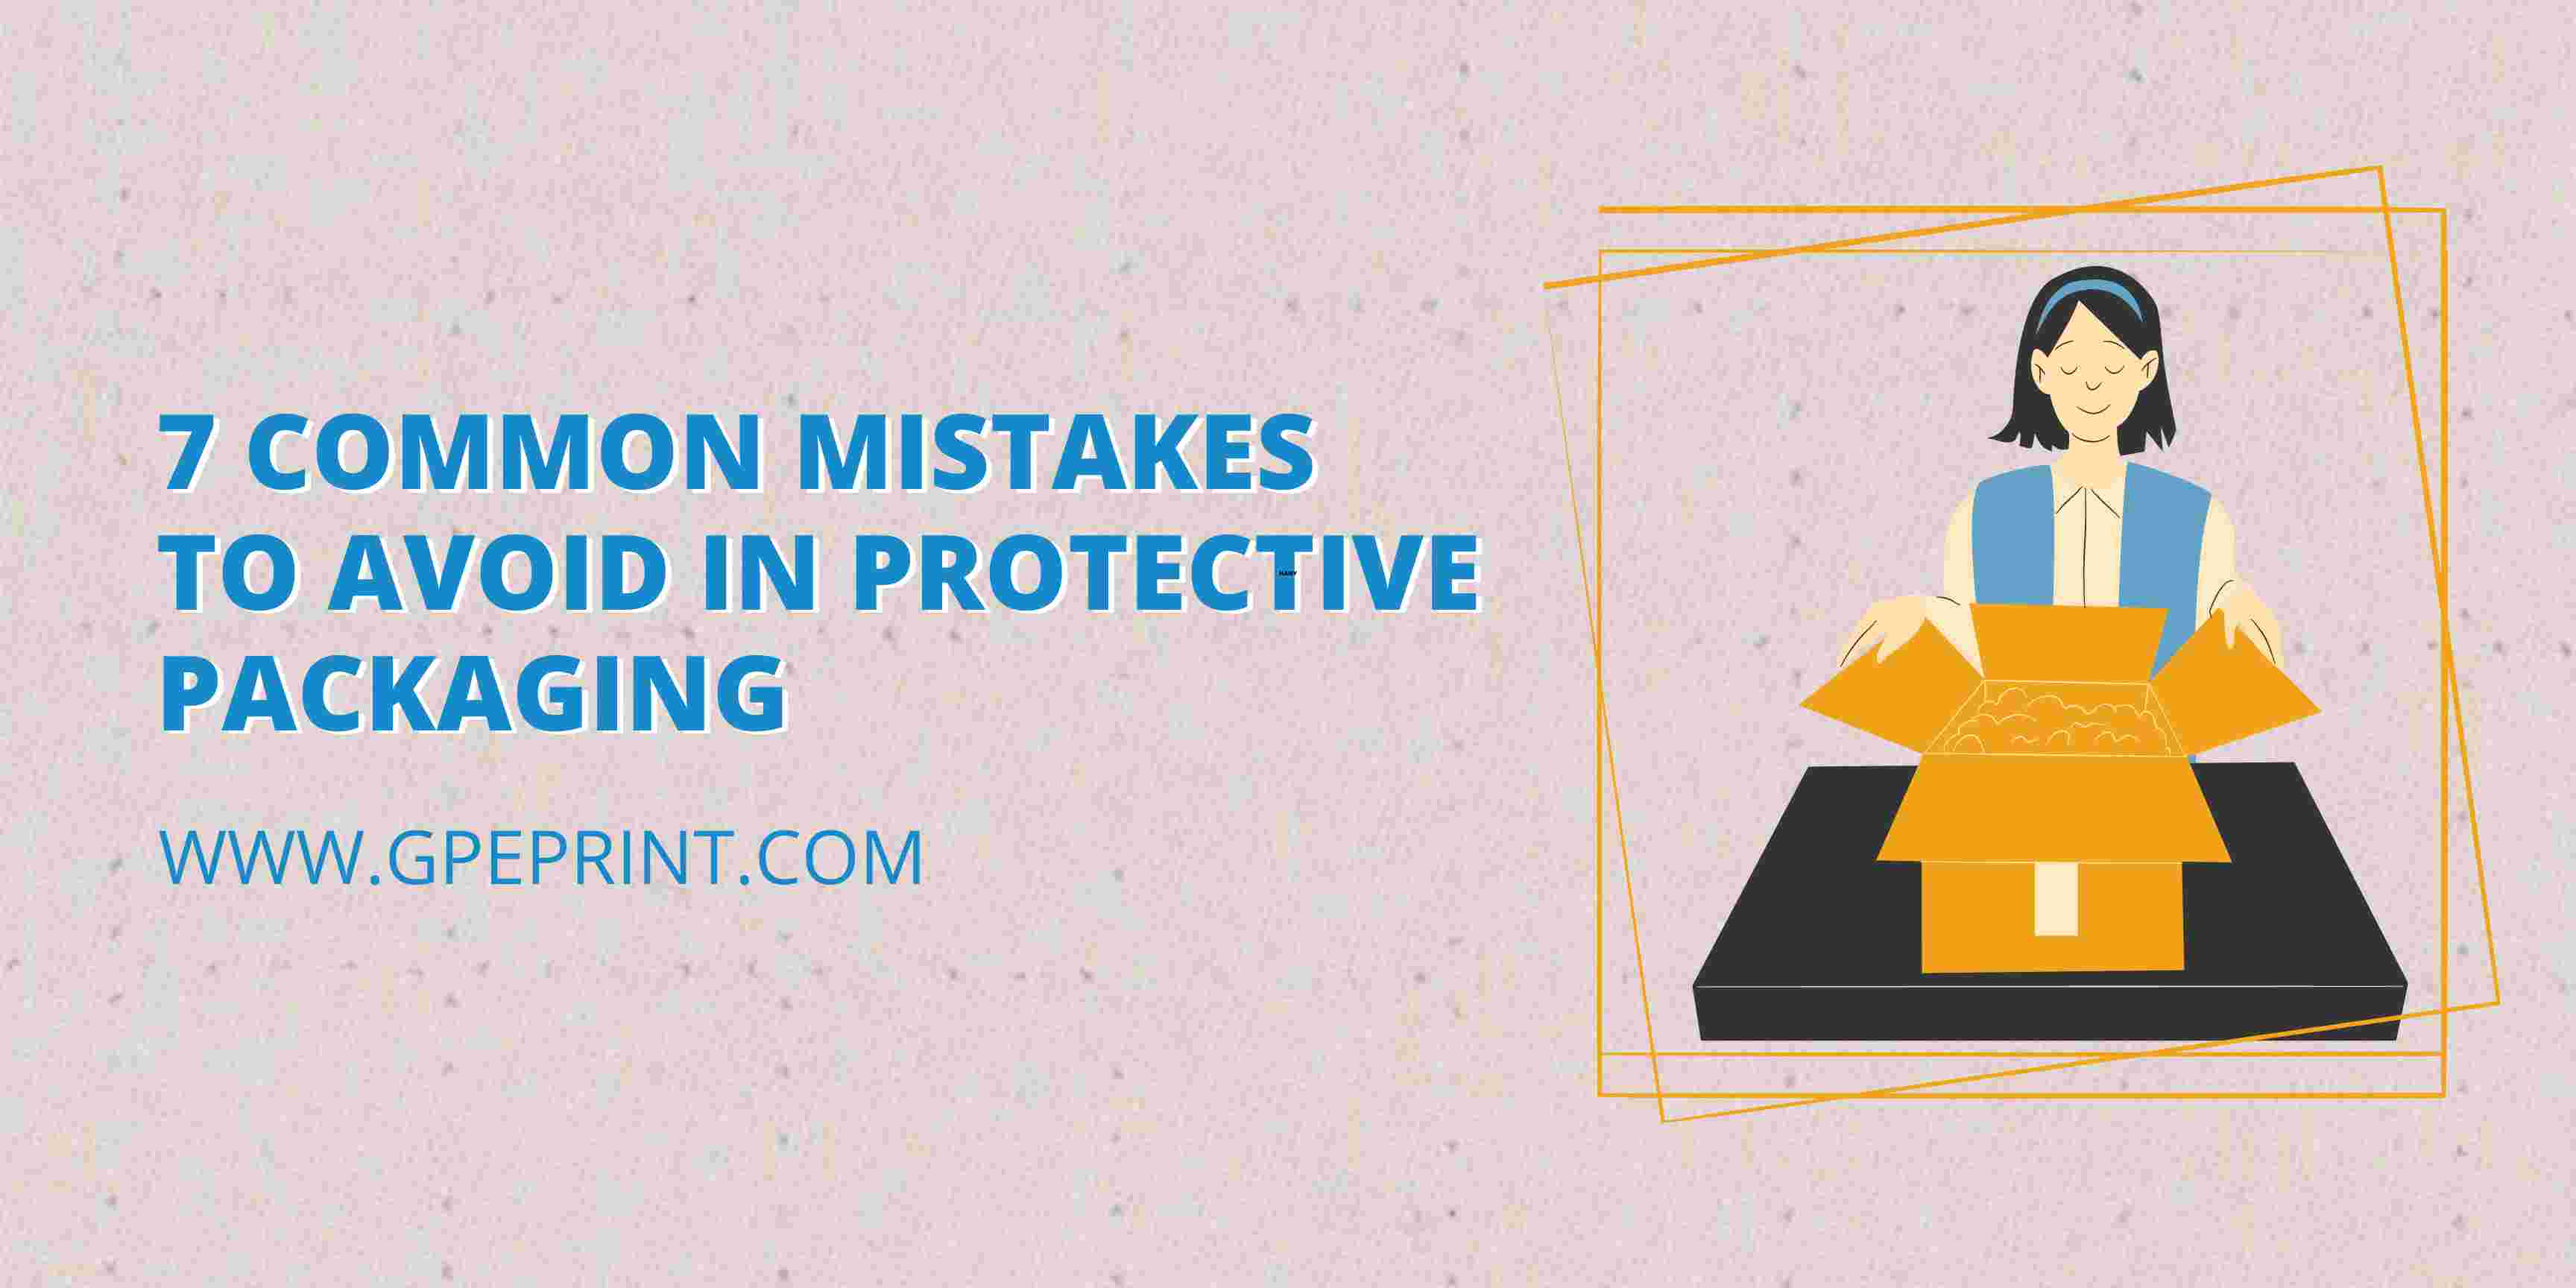 7 Common Mistakes to Avoid in Protective Packaging